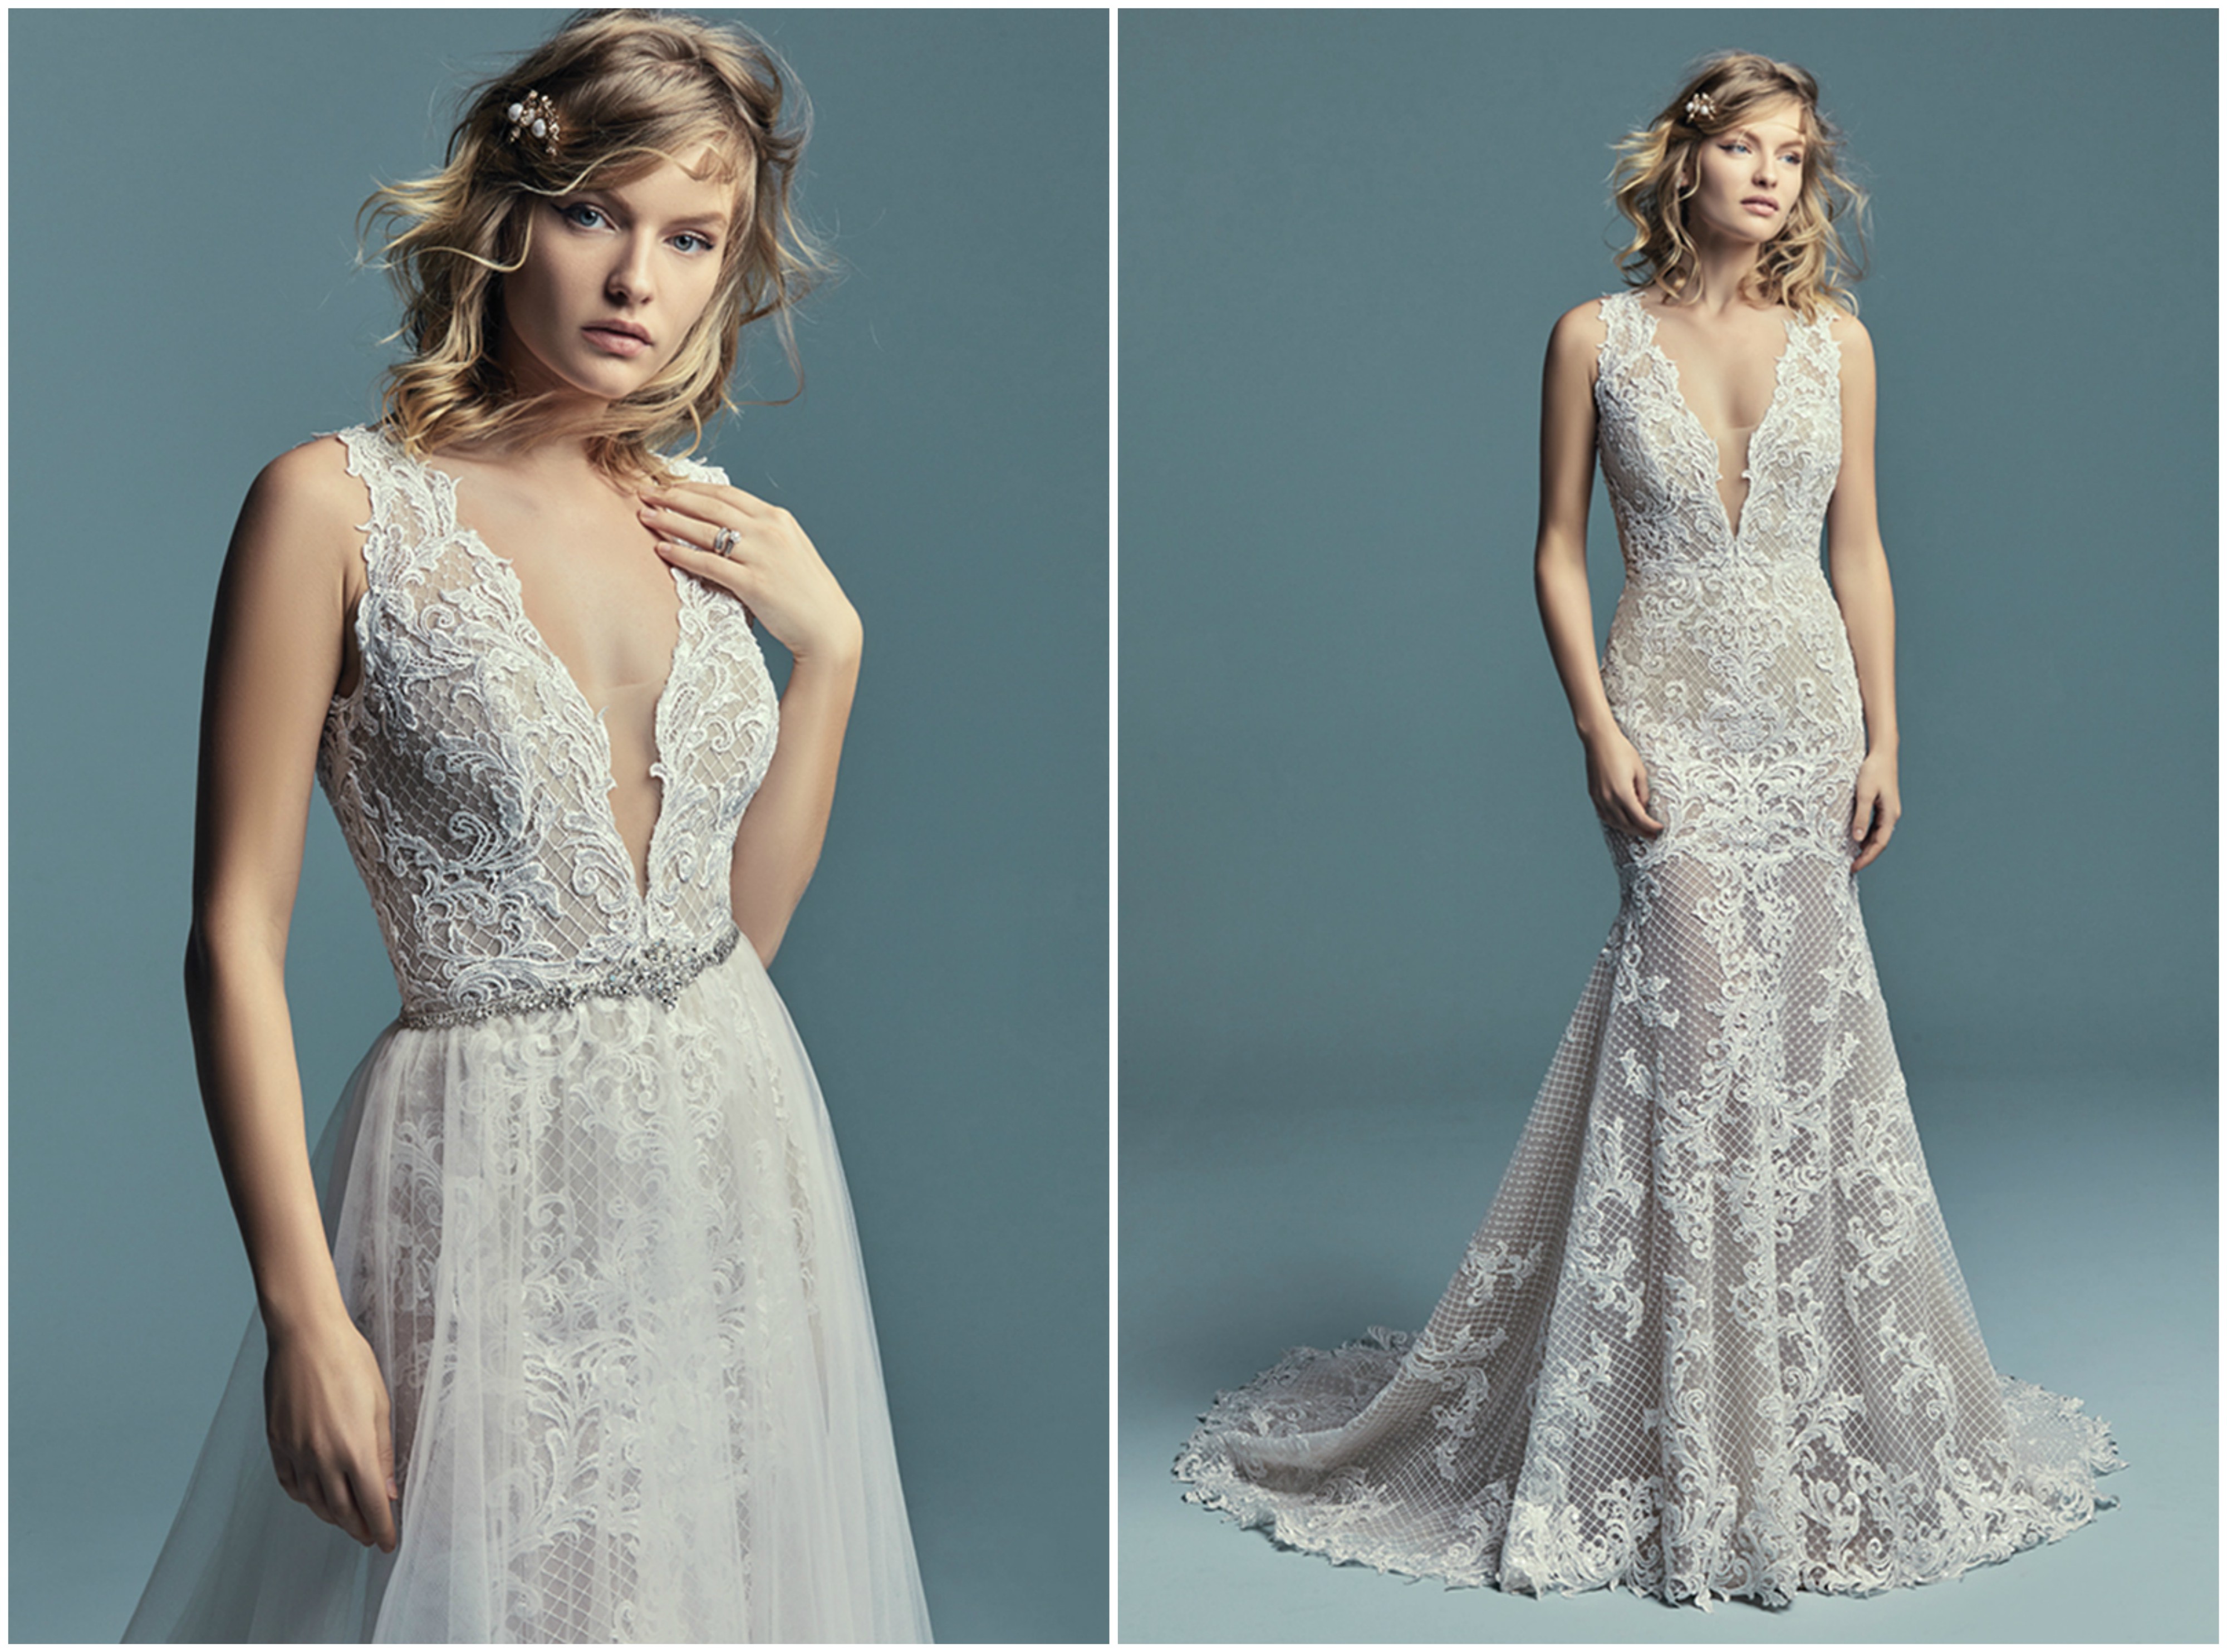 <a href="https://www.maggiesottero.com/maggie-sottero/hailey-marie/11269" target="_blank">Maggie Sottero</a>